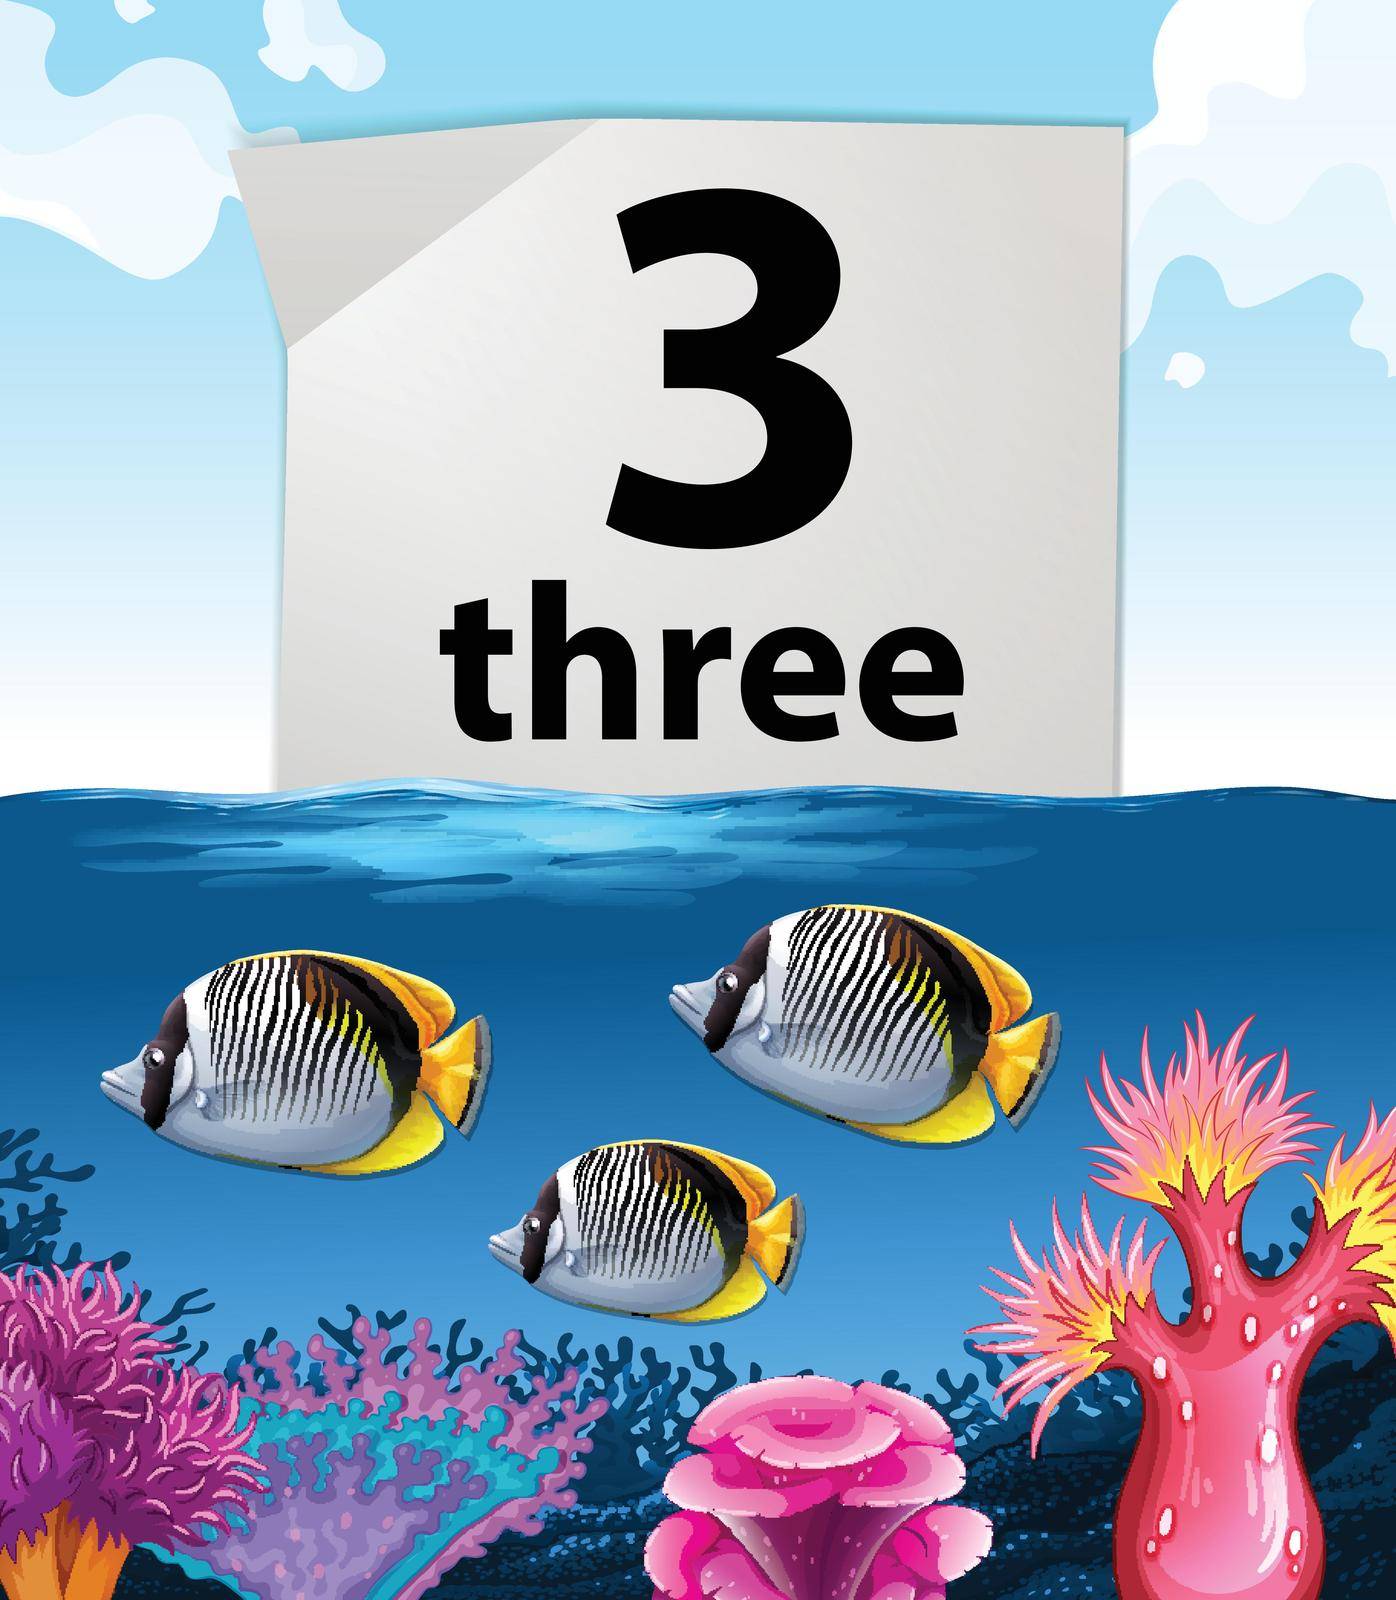 Number three and three fish underwater by iimages